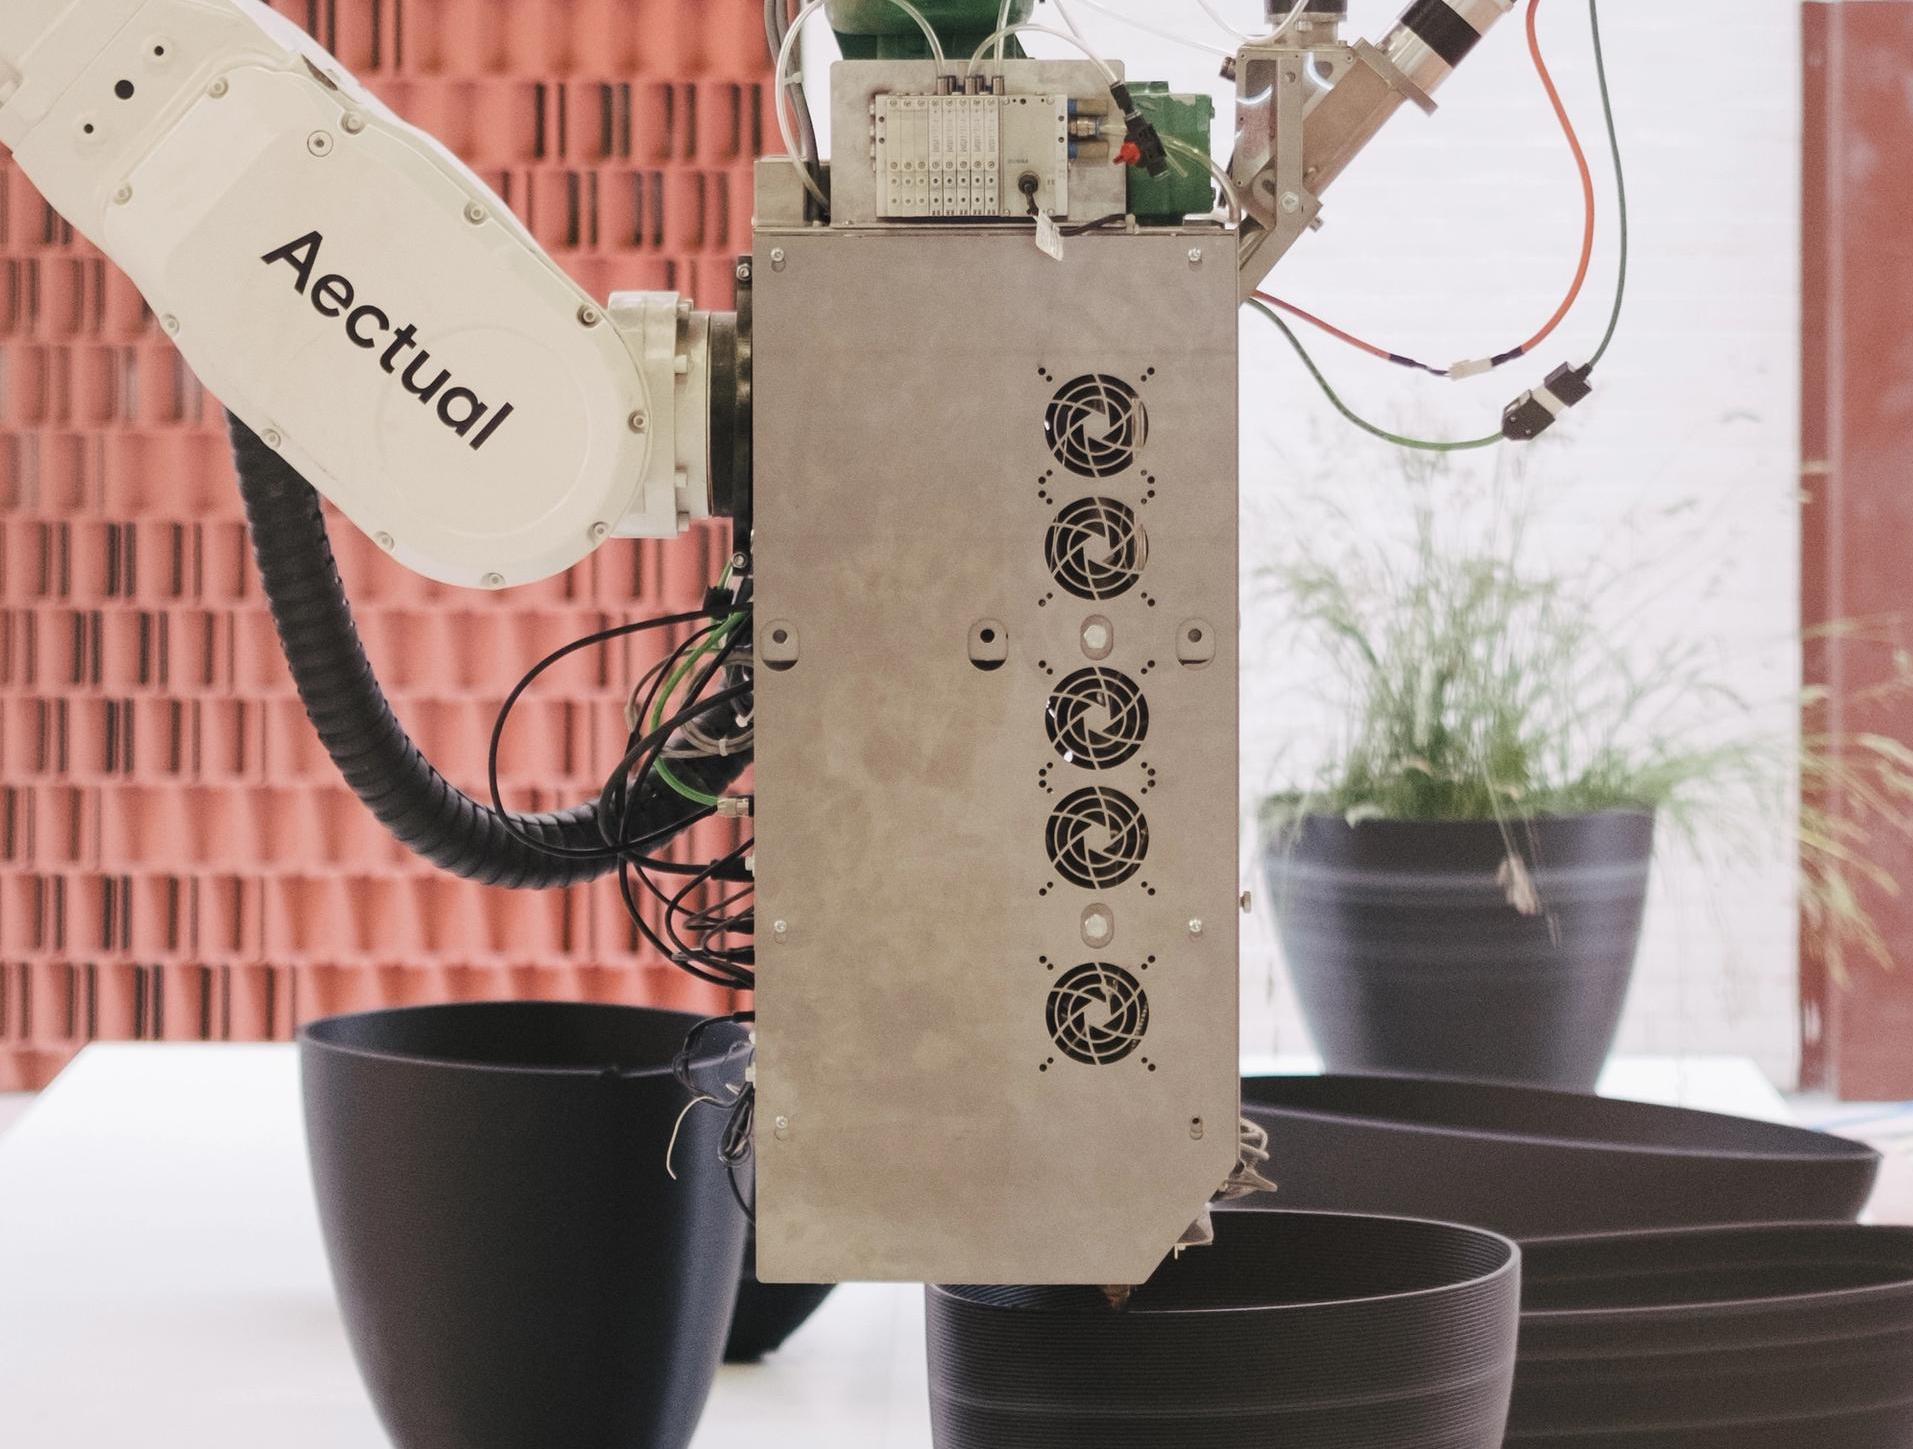 One of Aectual's 3D printers producing an eco-friendly planter.